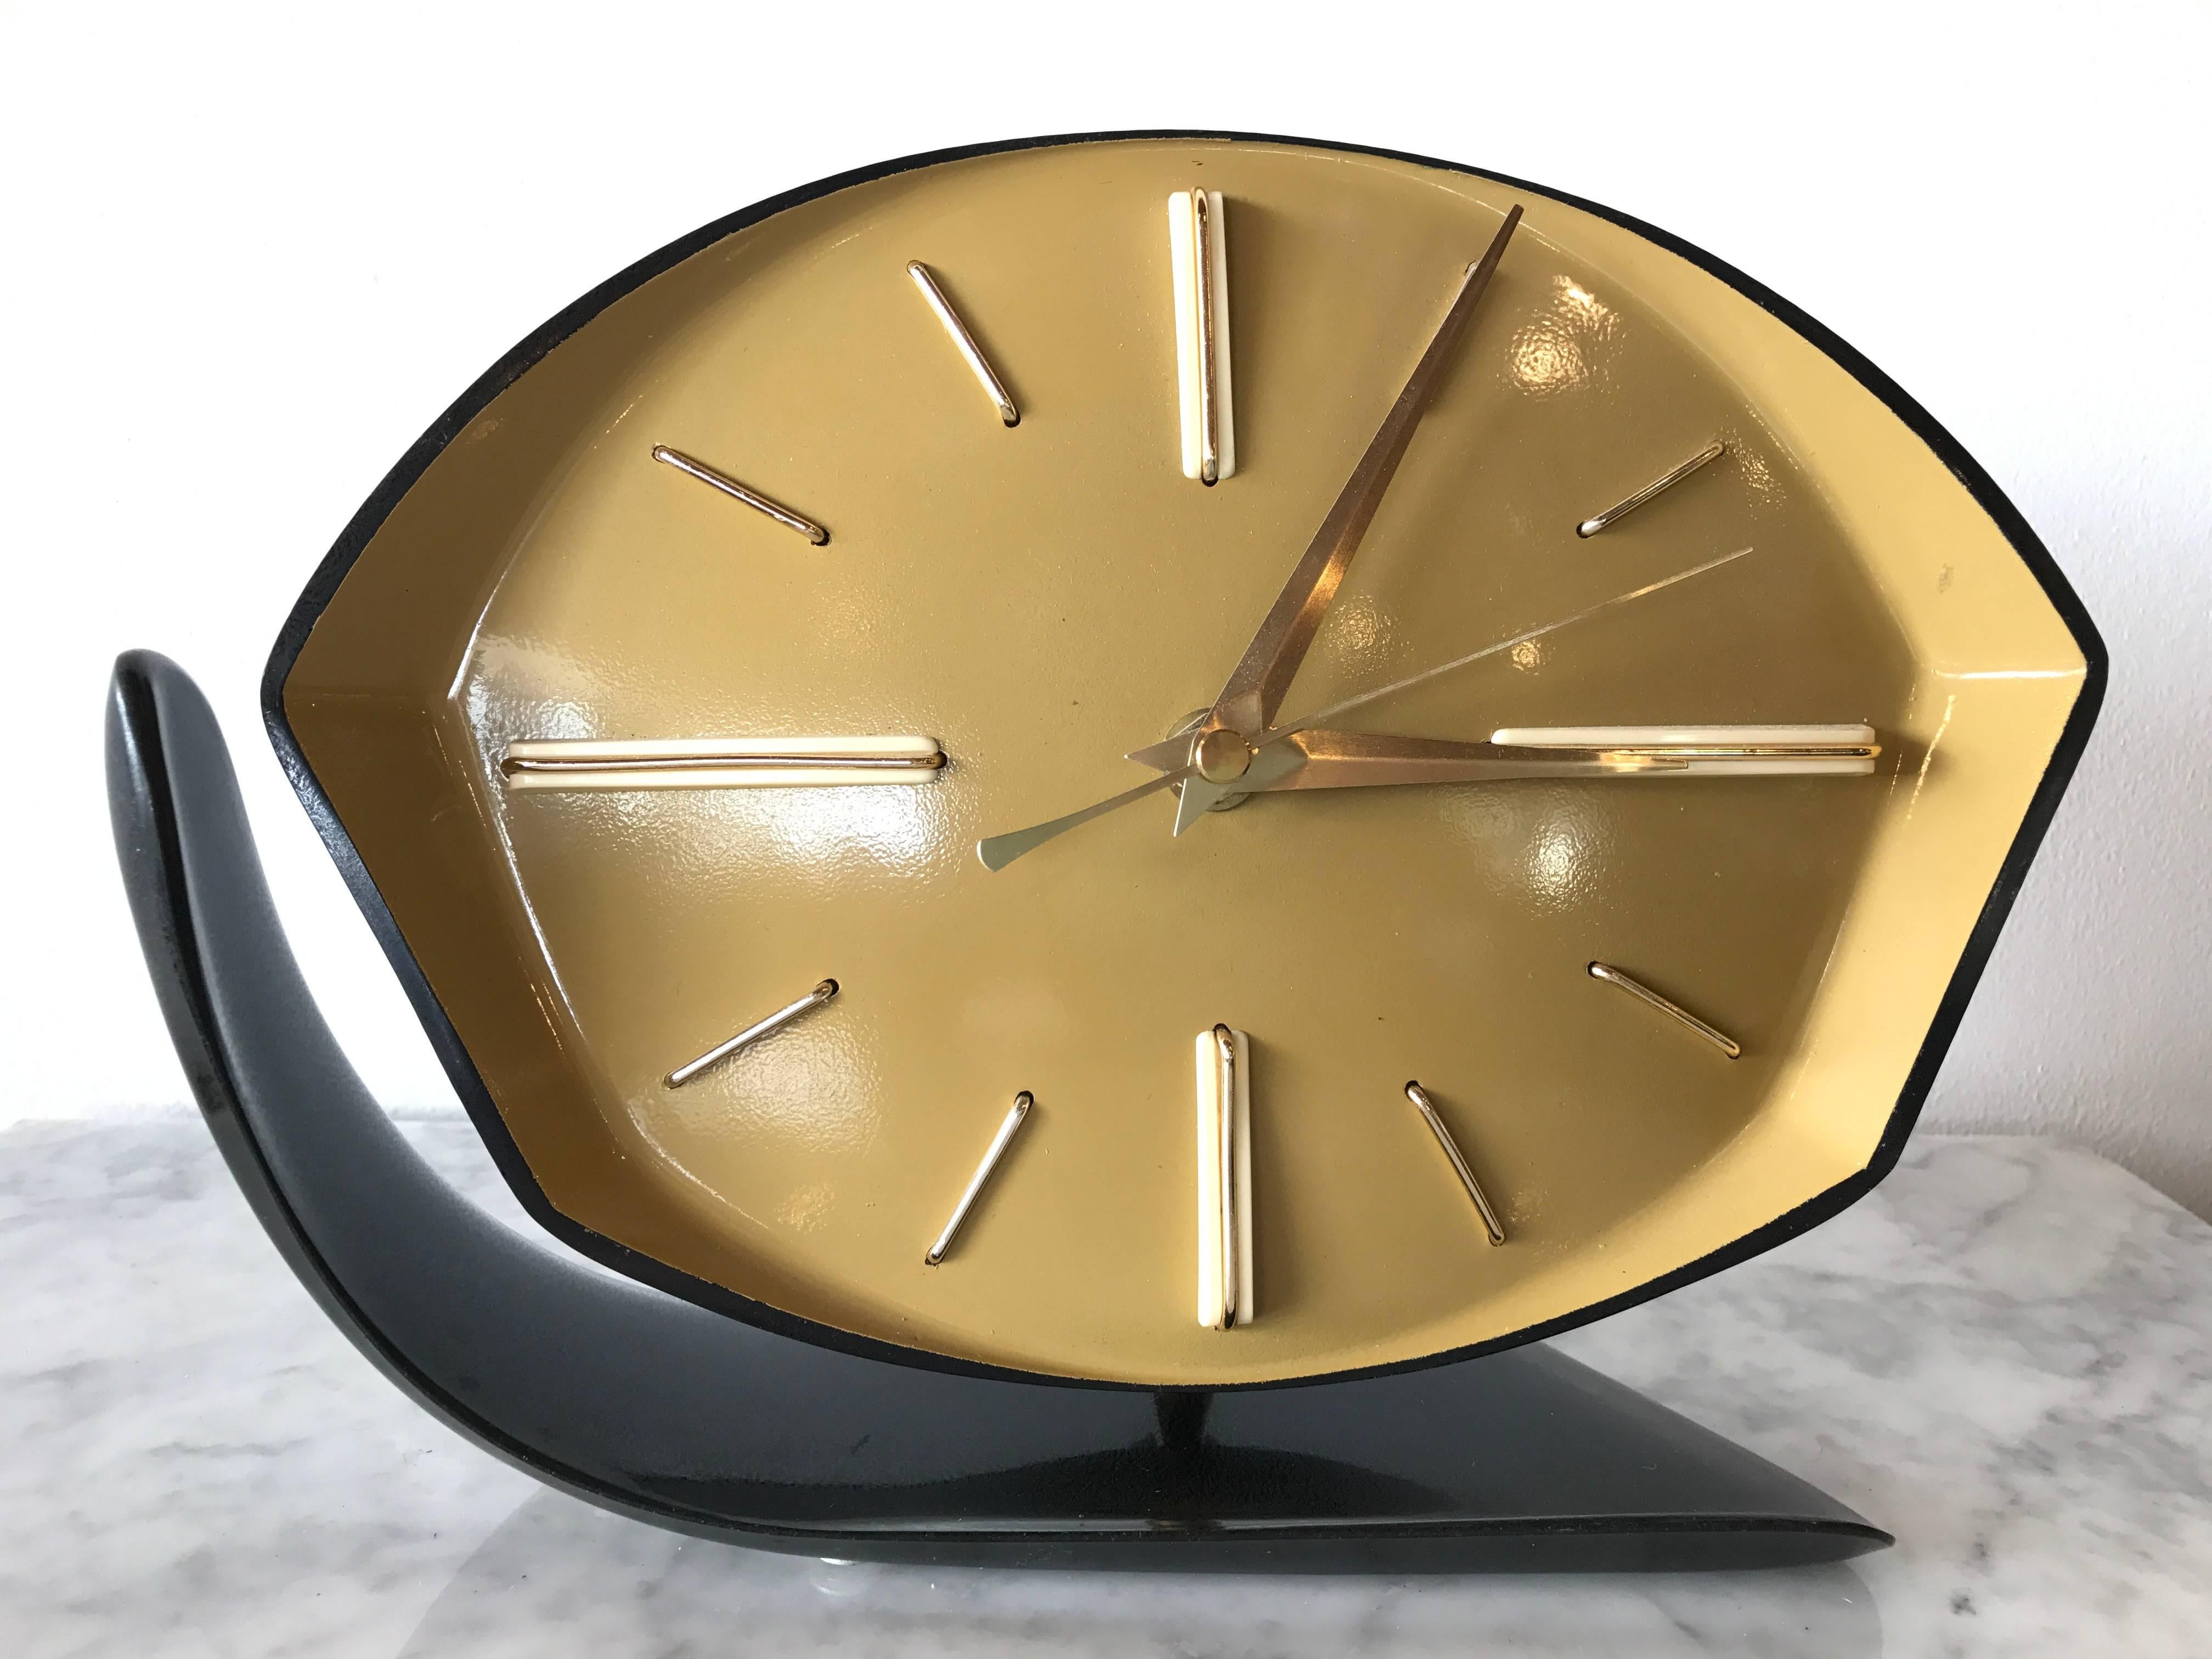 Elegantly crafted geometric Art Deco bakelite desk clock, circa 1940. Featuring a wide ochre colored angular face punctuated by cream bakelite and brass markers with brass minute and hour hands. This clock is positioned on a brass stem with a ball